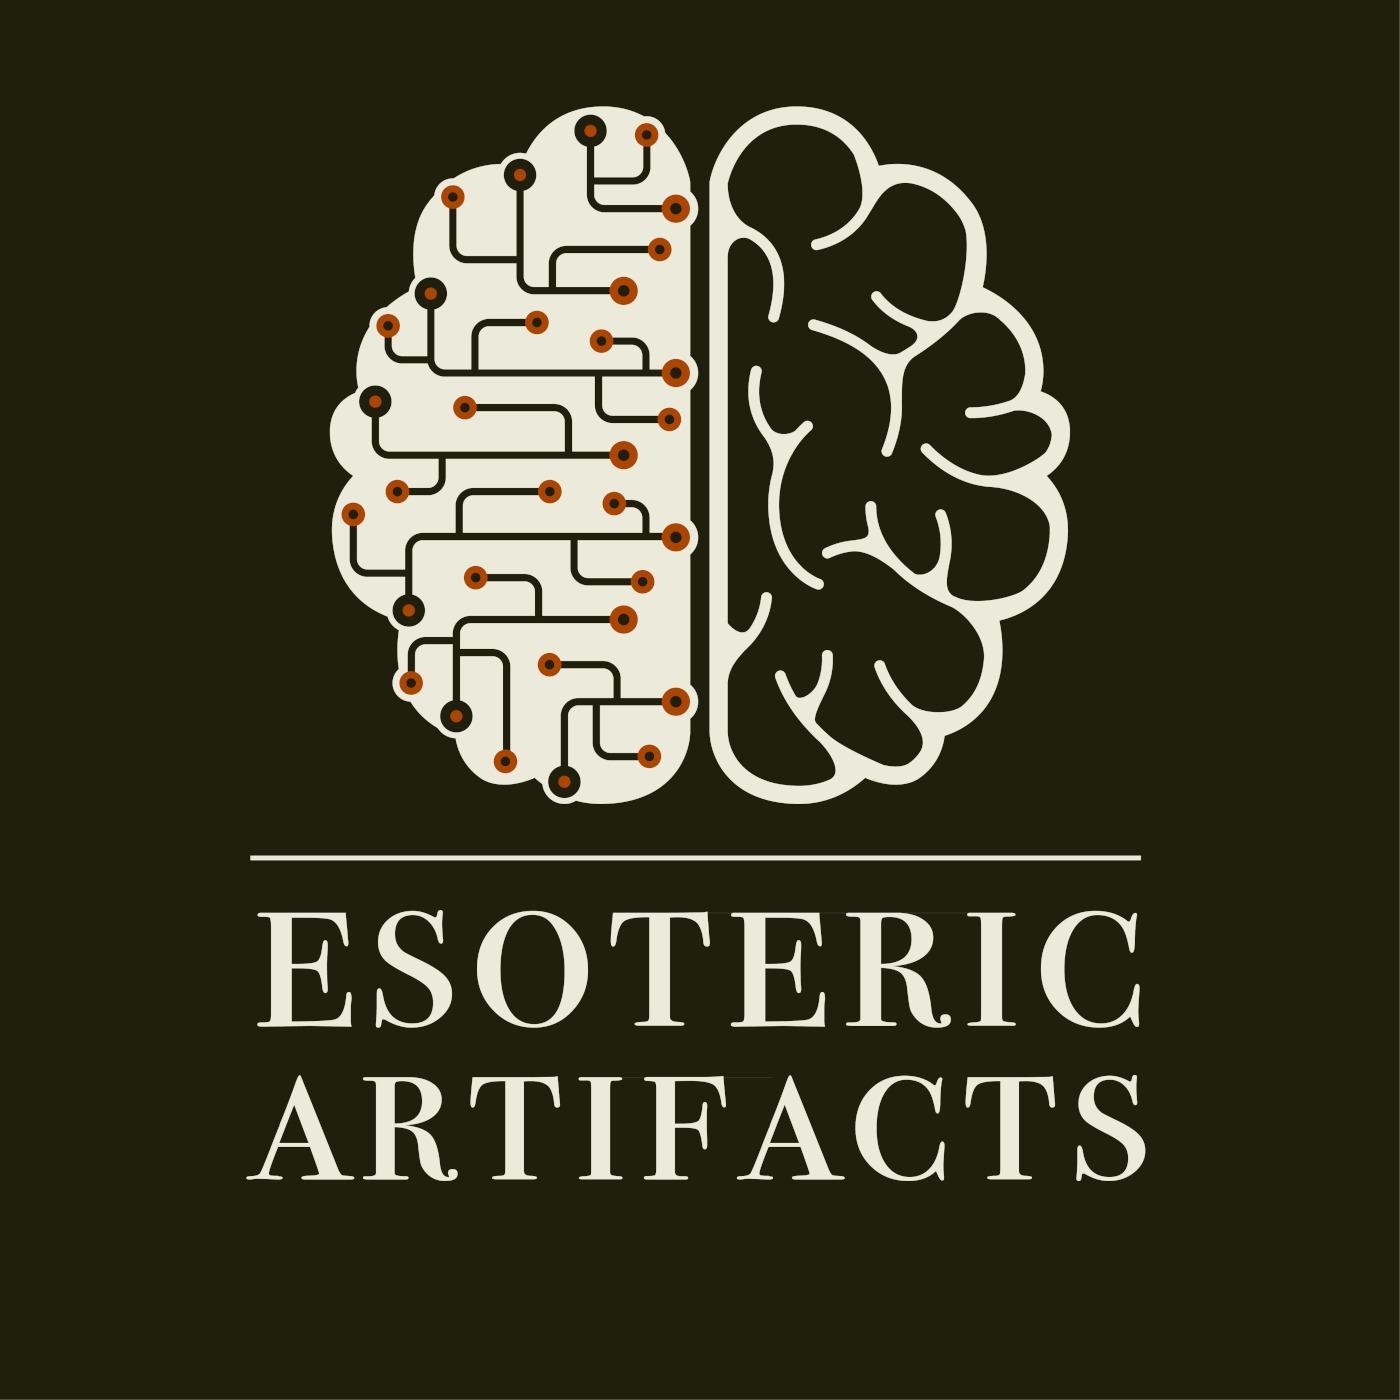 Esoteric Artifacts